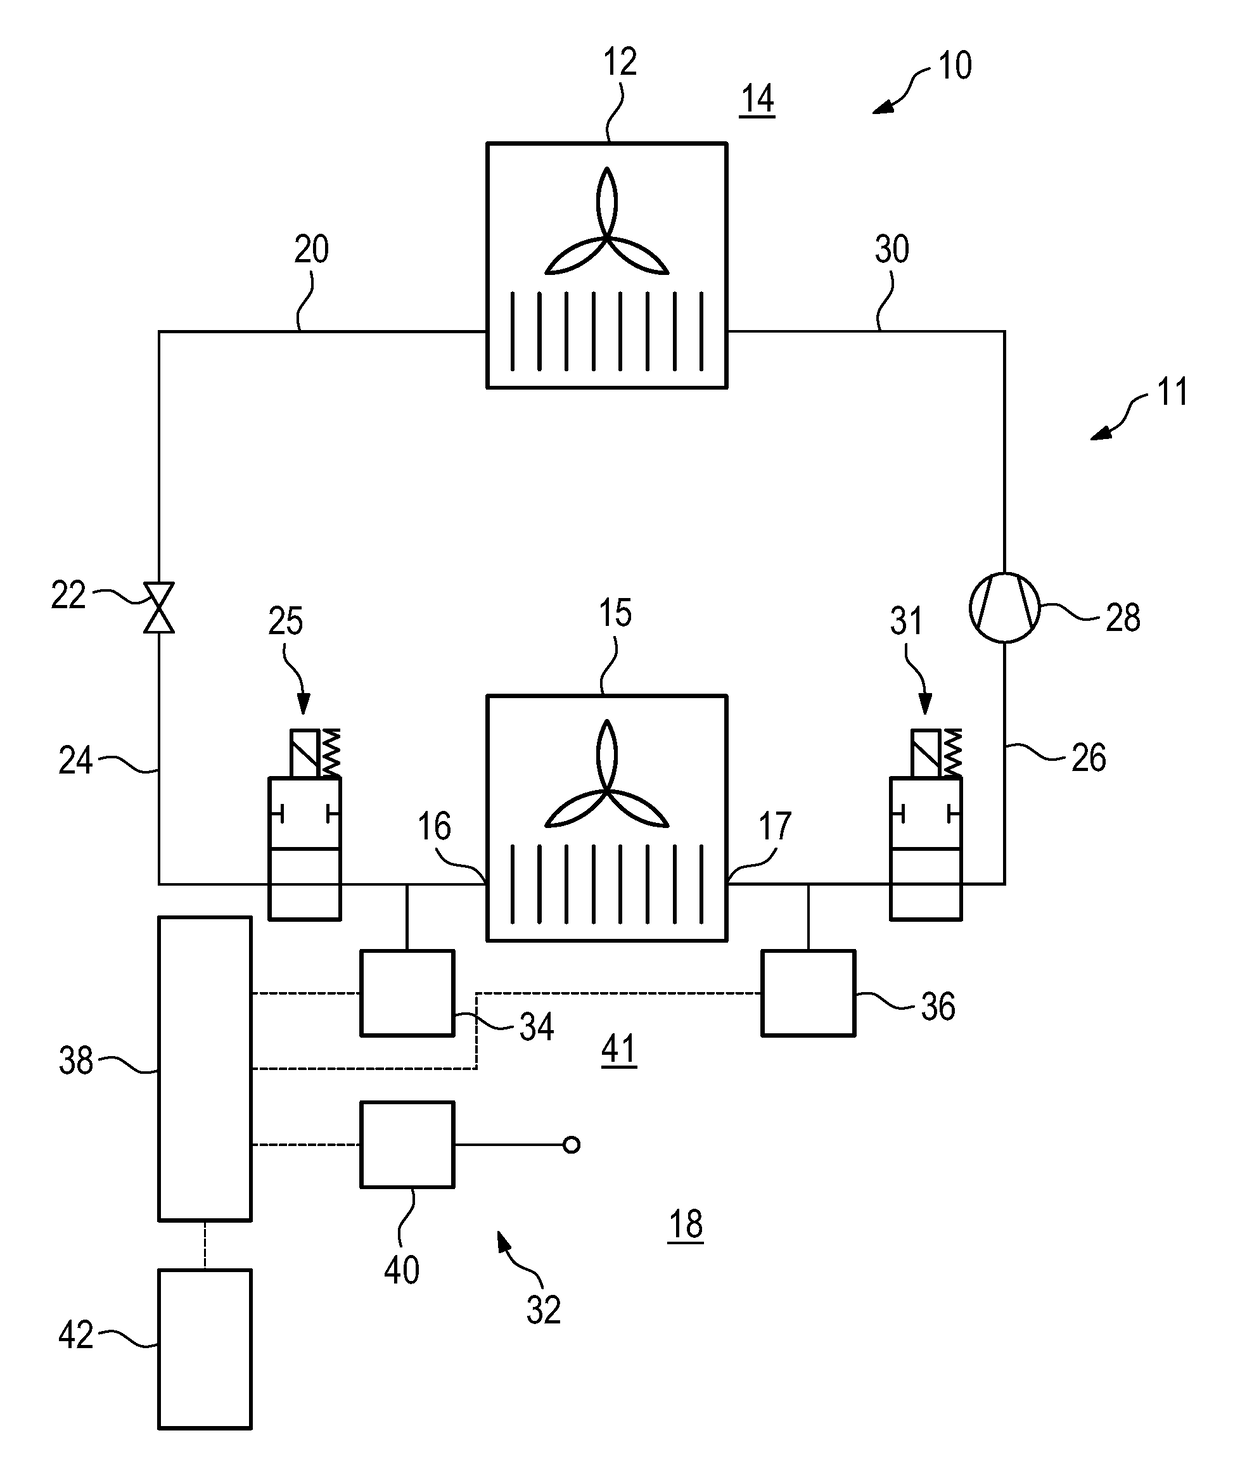 Air conditioning system and method for leakage detection in an air conditioning system